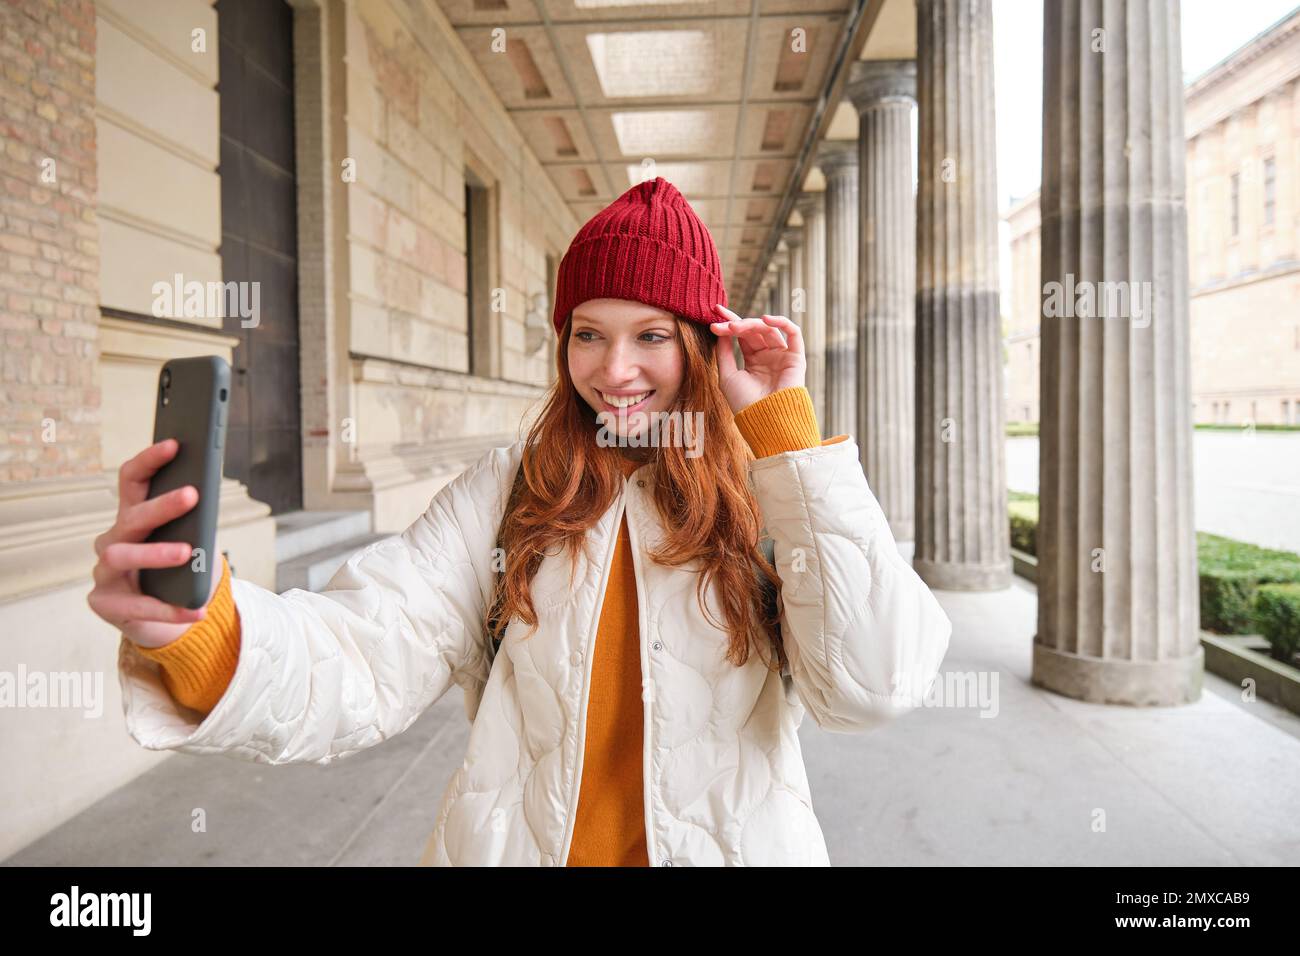 Stylish redhead girl tourist, takes selfie in front of tourism attraction, makes photo with smartphone, looks at mobile camera and poses. Stock Photo